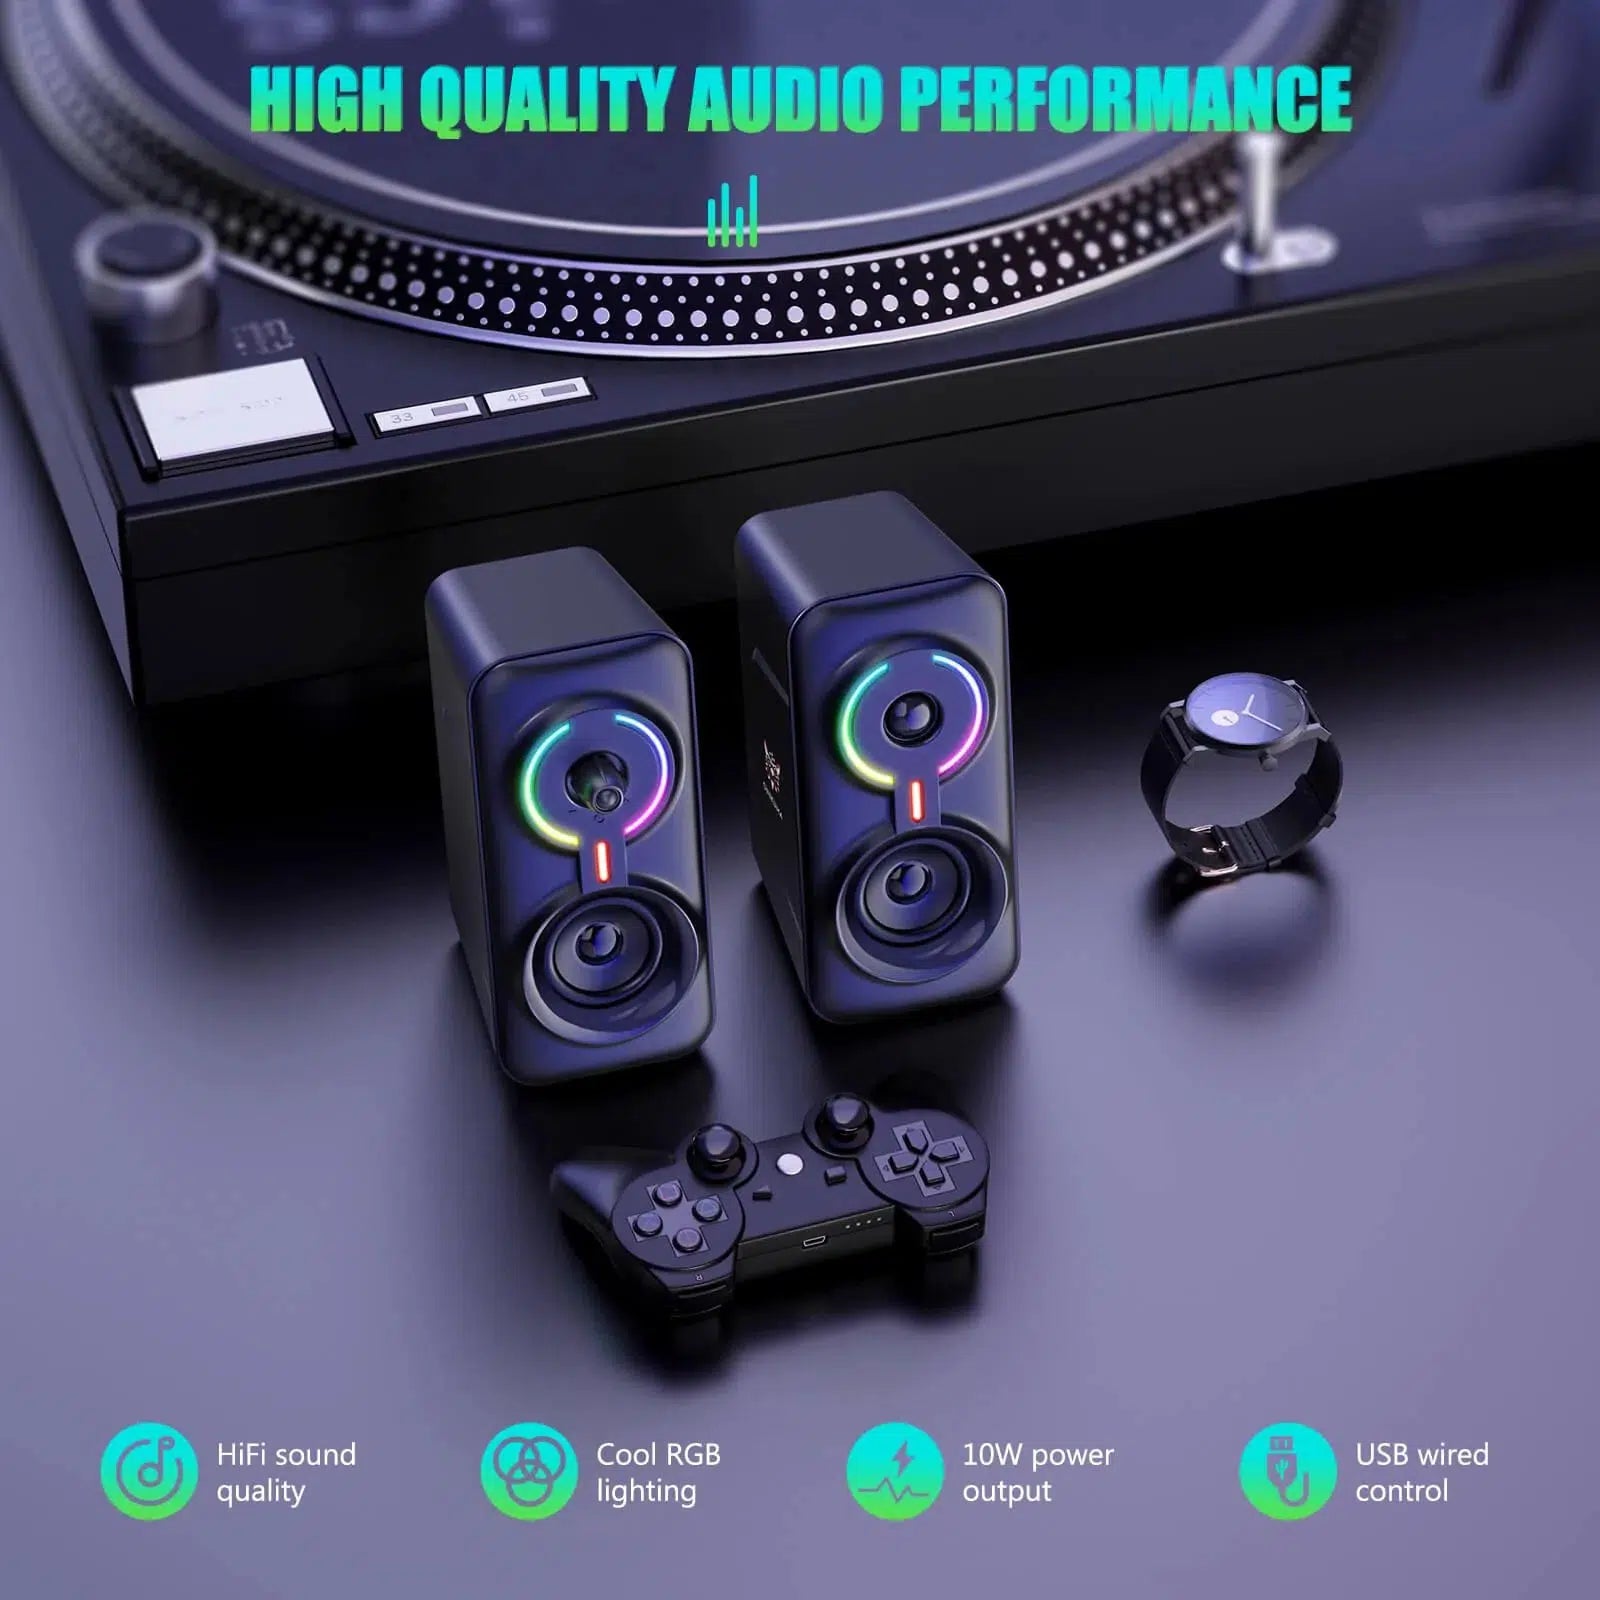 HIGH QUALITY AUDIO PERFORMANCE | ONIKUMA L6 Multimedia Gaming Speaker with BT5.0 and AUX Mode